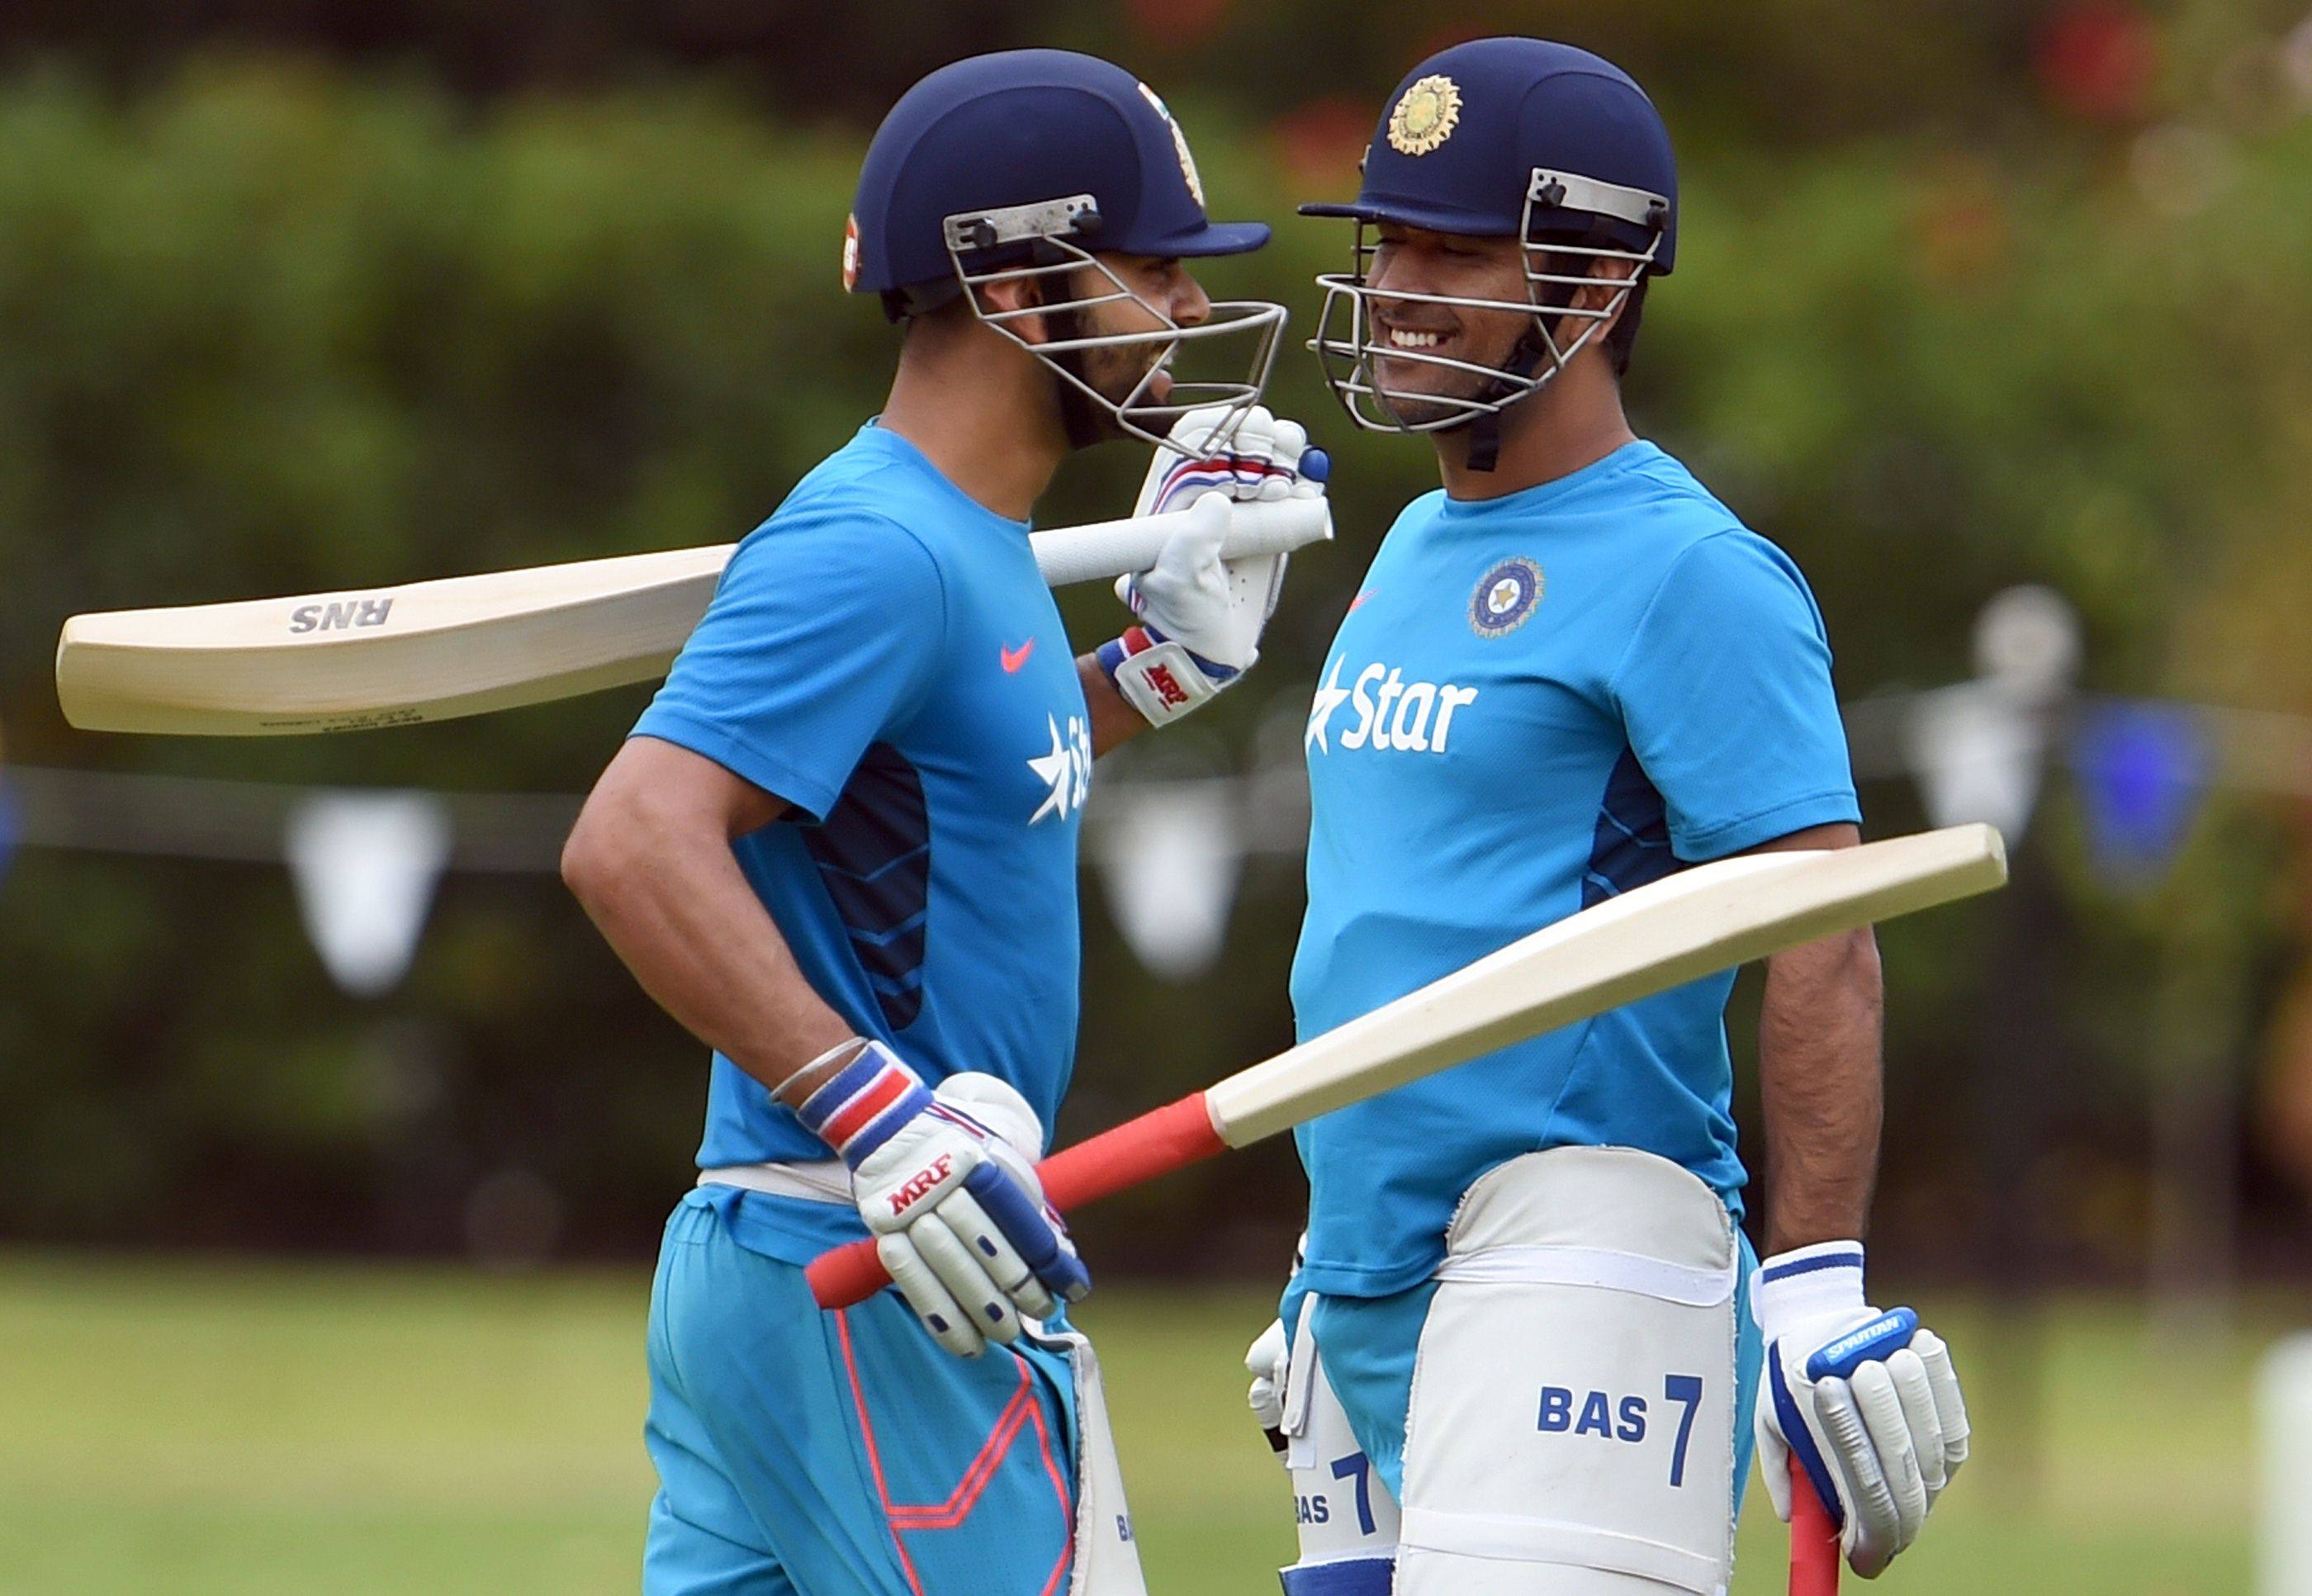 Two of the biggest names in Indian cricket, MS Dhoni (right) and Virat Kolhi, will face each other in the opening match of the Indian Premier League season.  Photo: AFP 